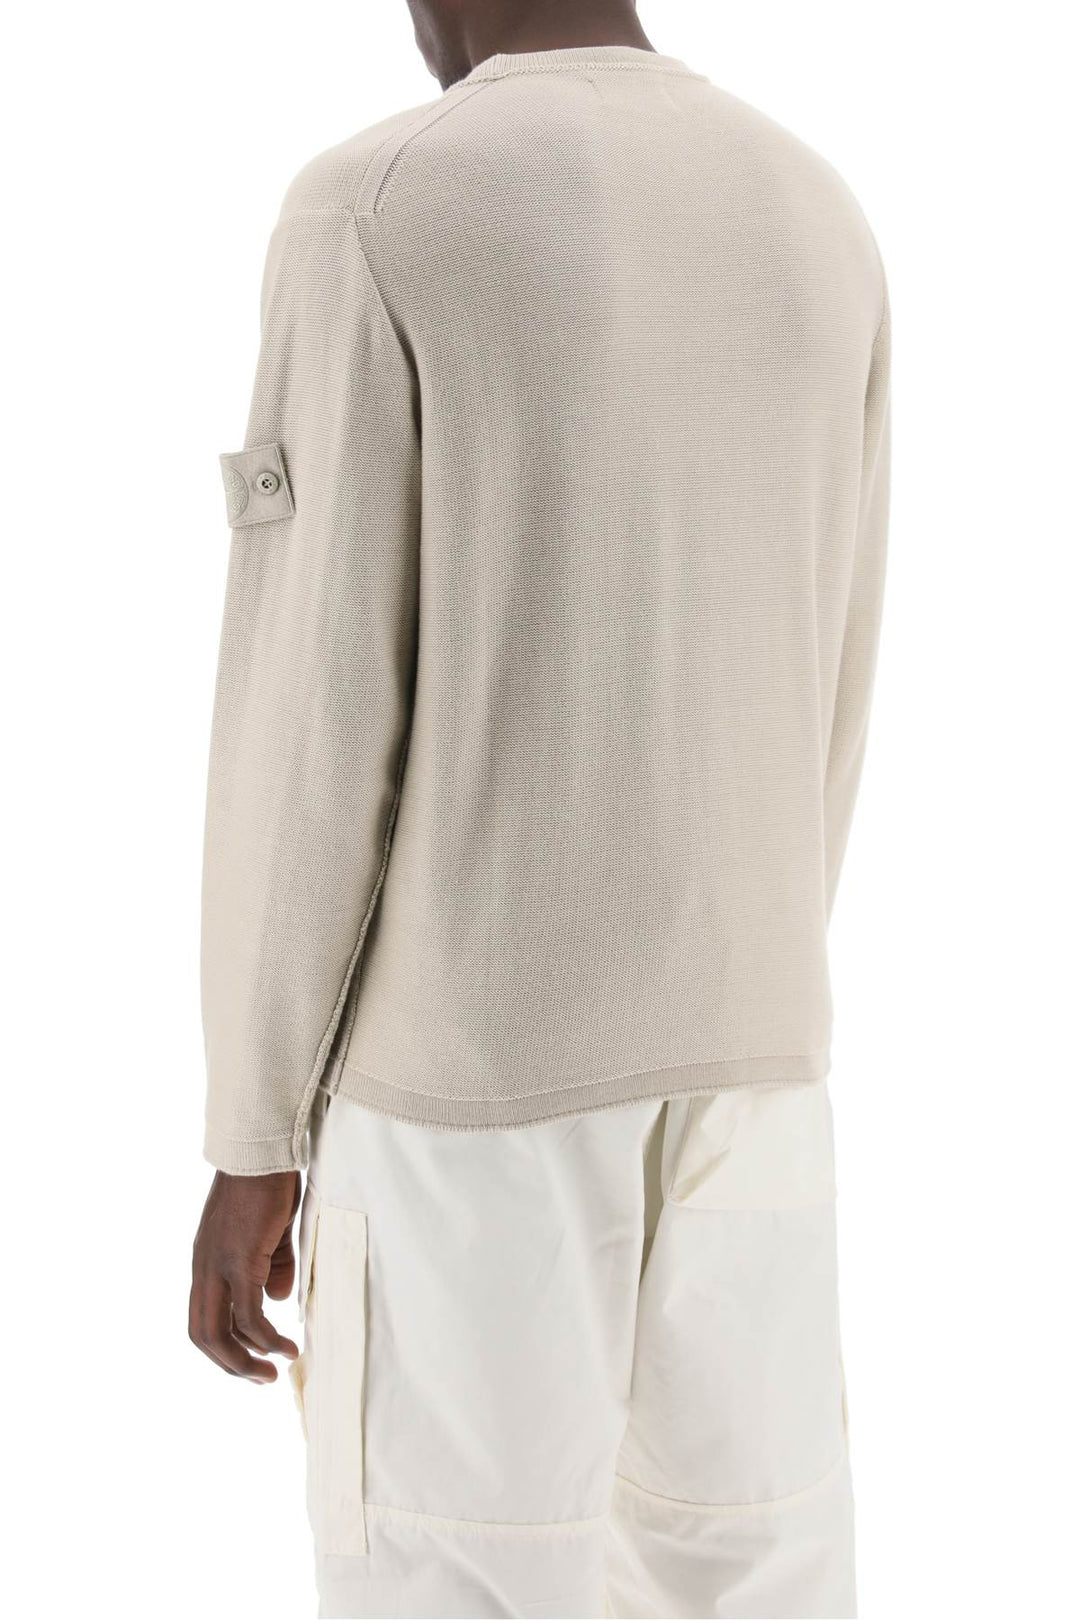 Stone Island Cotton And Cashmere Ghost Piece Pullover   Beige